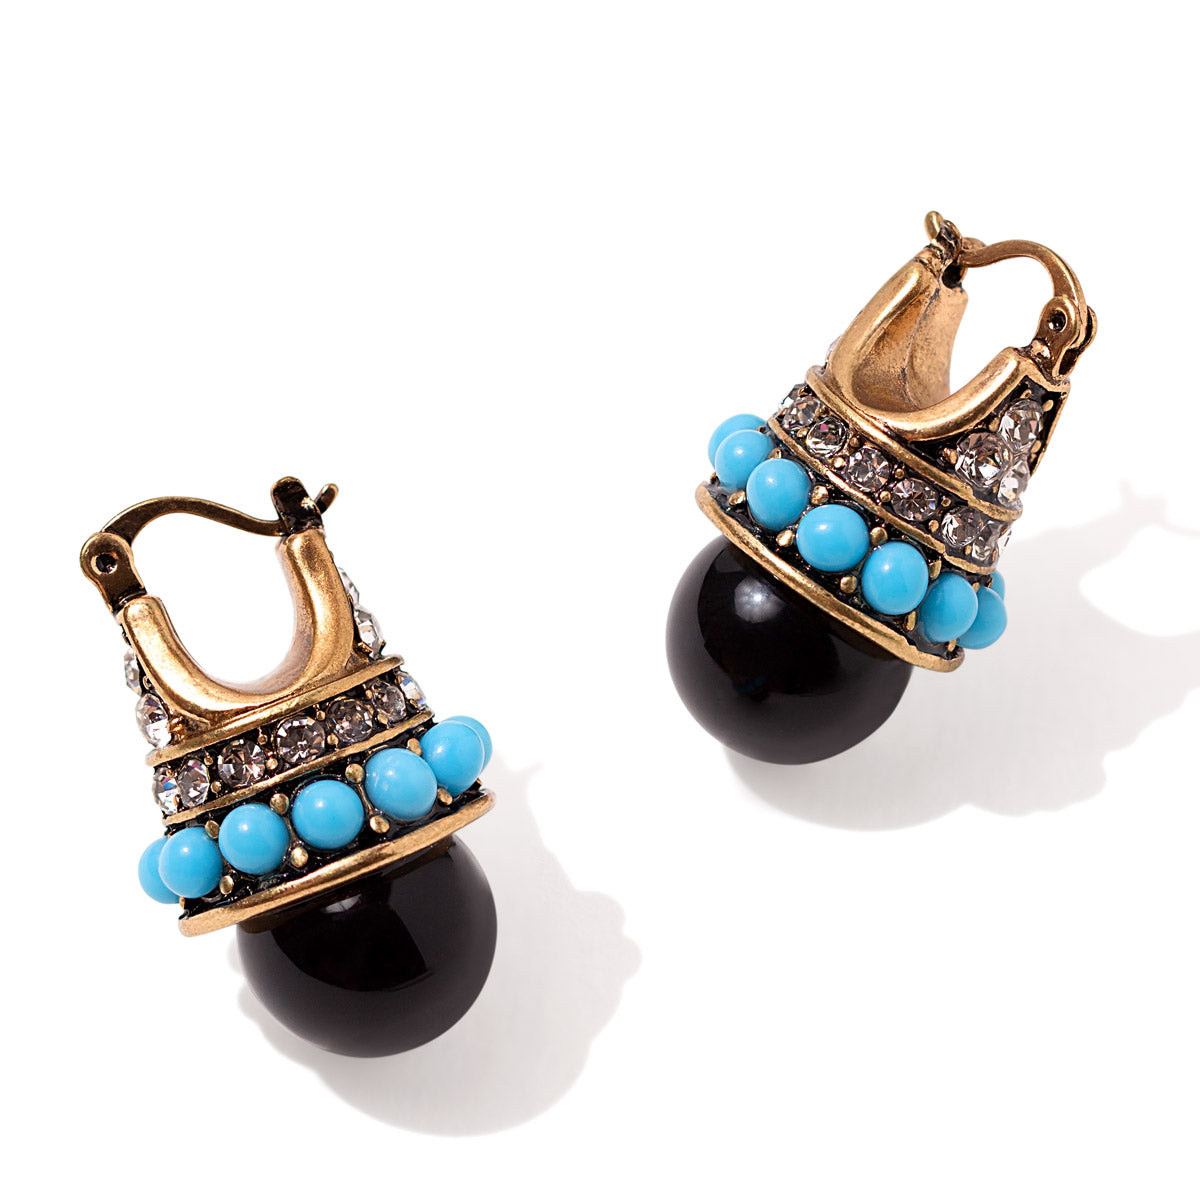 Buy the Carved Black Onyx, Oval Rainbow Moonstone, and Diamond Earrings at  our Online Store – Diana Vincent Jewelry Designs